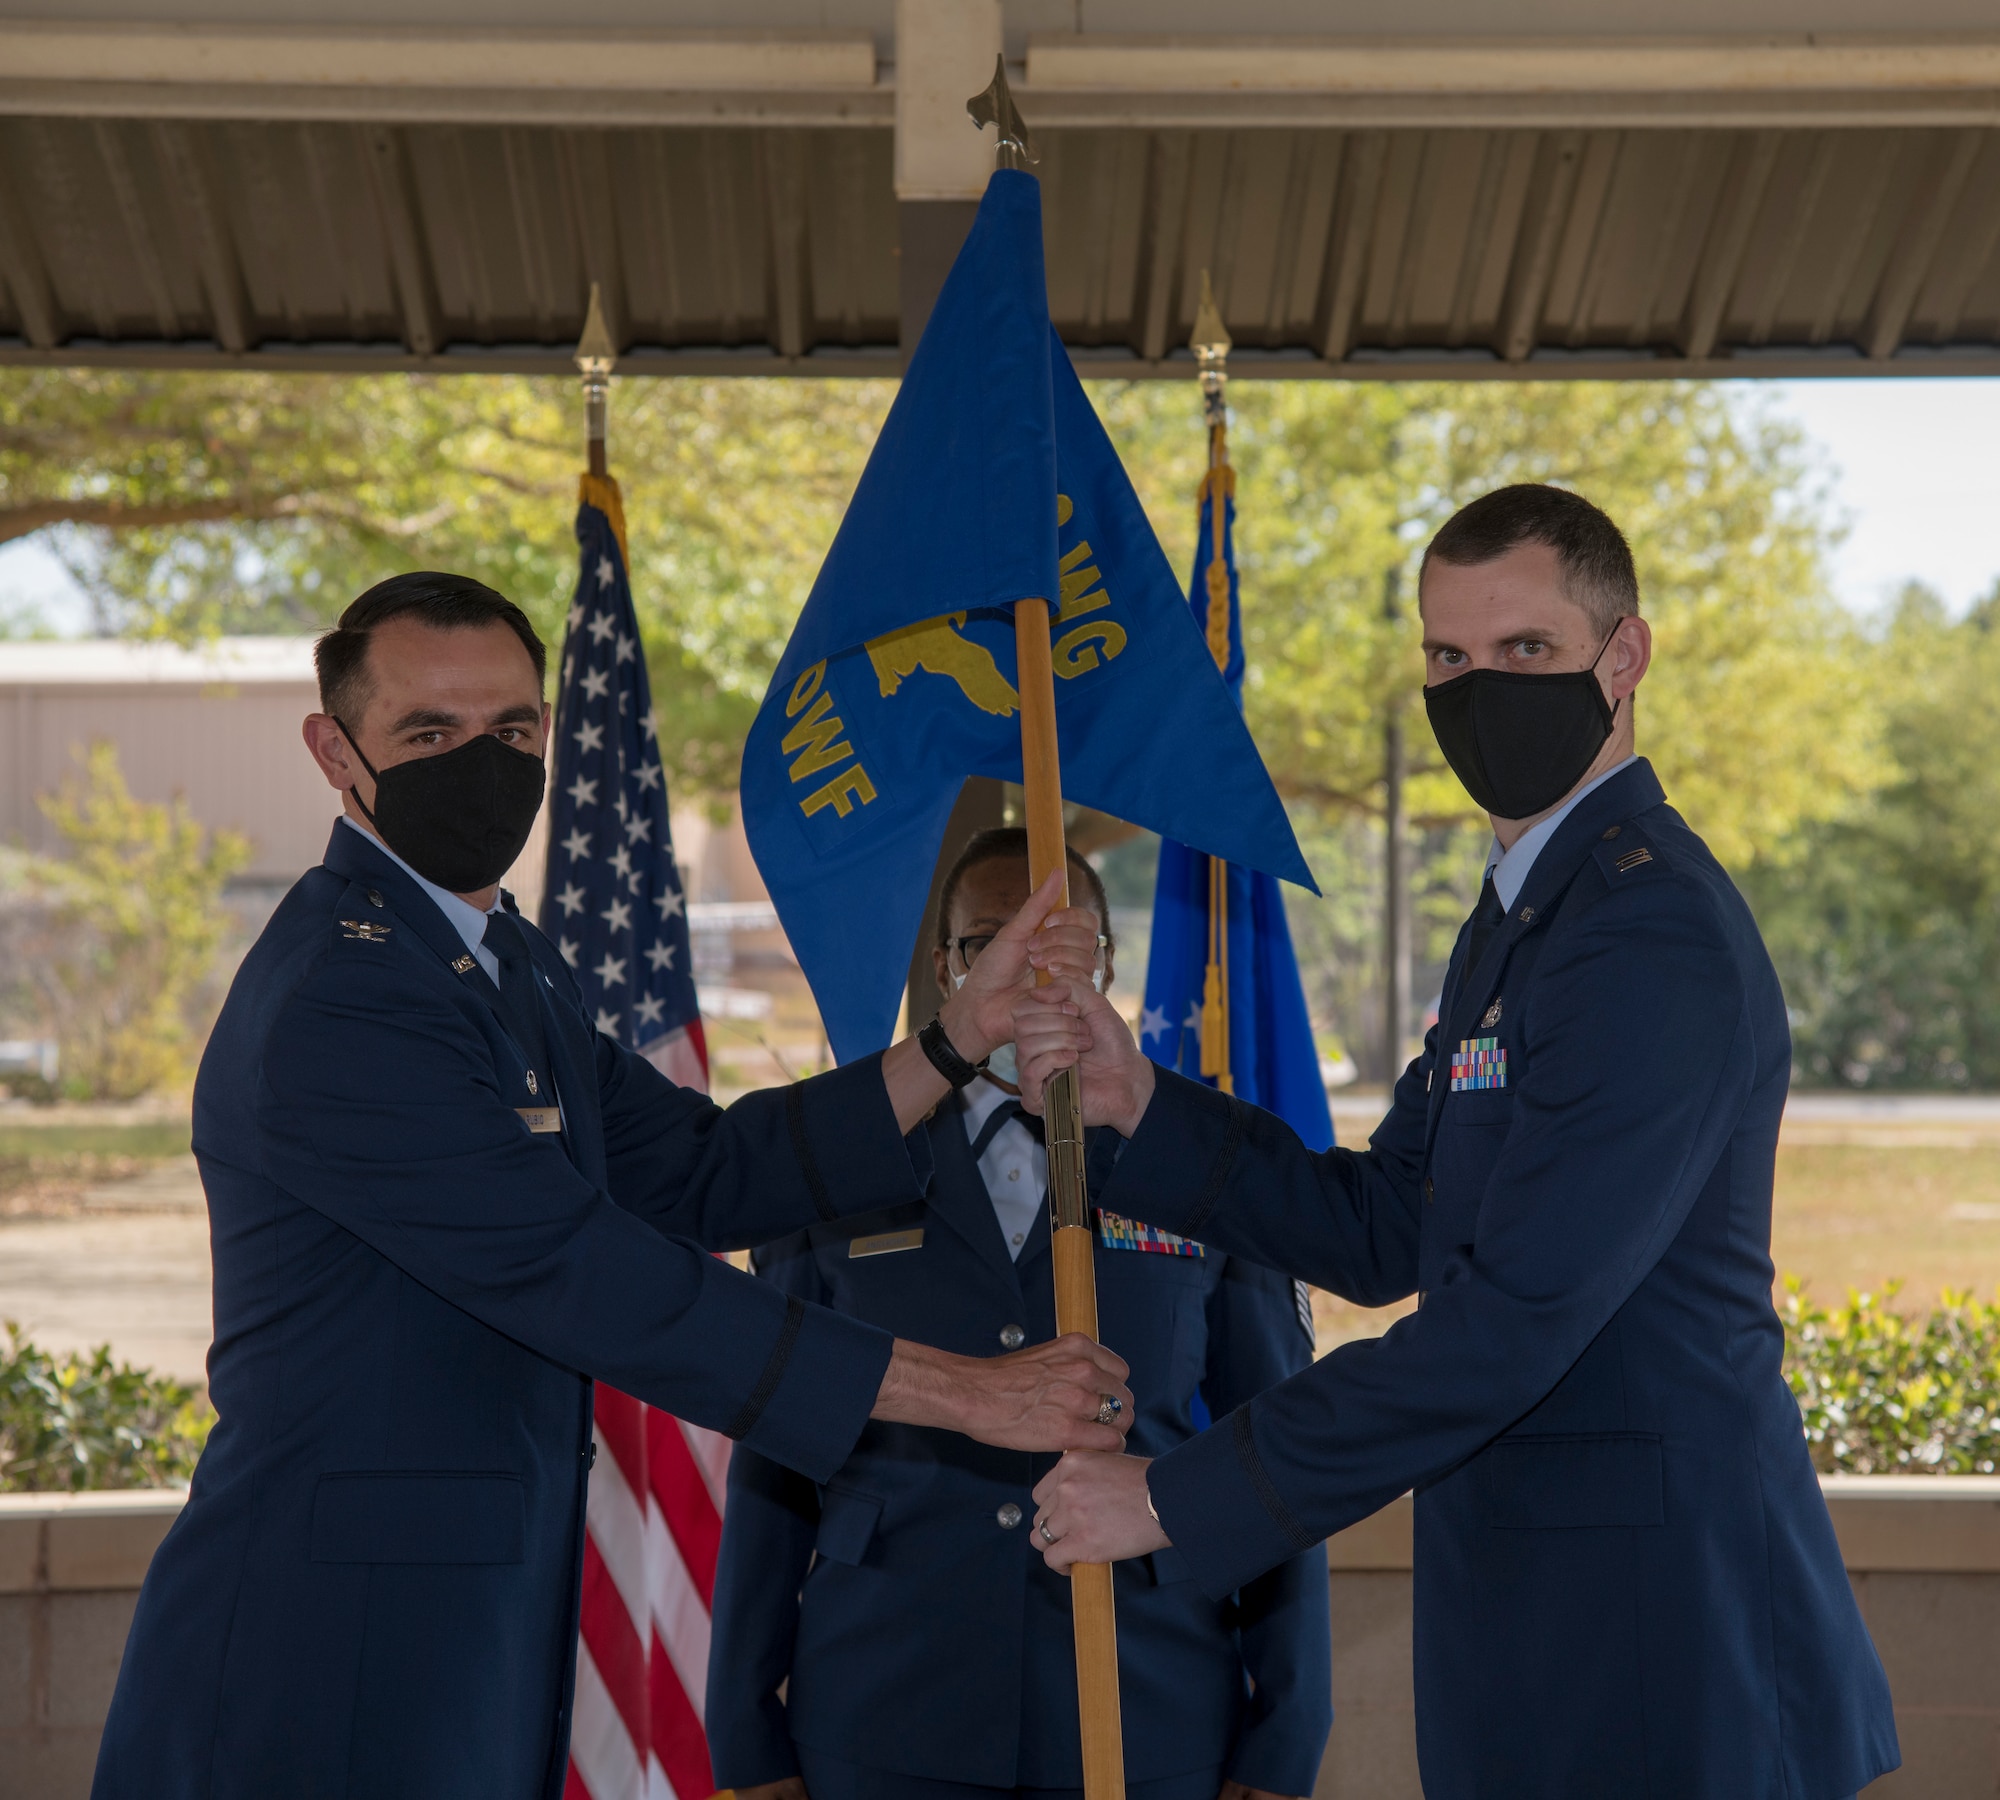 Col. Stuart M. Rubio, 403rd operations group commander at Keesler Air Force Base, Miss., hands the 5th Operational Weather Flight guidon to new commander Capt. Grant J. Talkington during an assumption of command ceremony at the 28th Operational Weather Squadron pavilion at Shaw Air Force Base, S.C. April 9, 2021. The flight is a geographically separated unit assigned to the Air Force Reserve's 403rd Wing.(U.S. Air Force photo by Staff Sgt. Kristen Pittman)